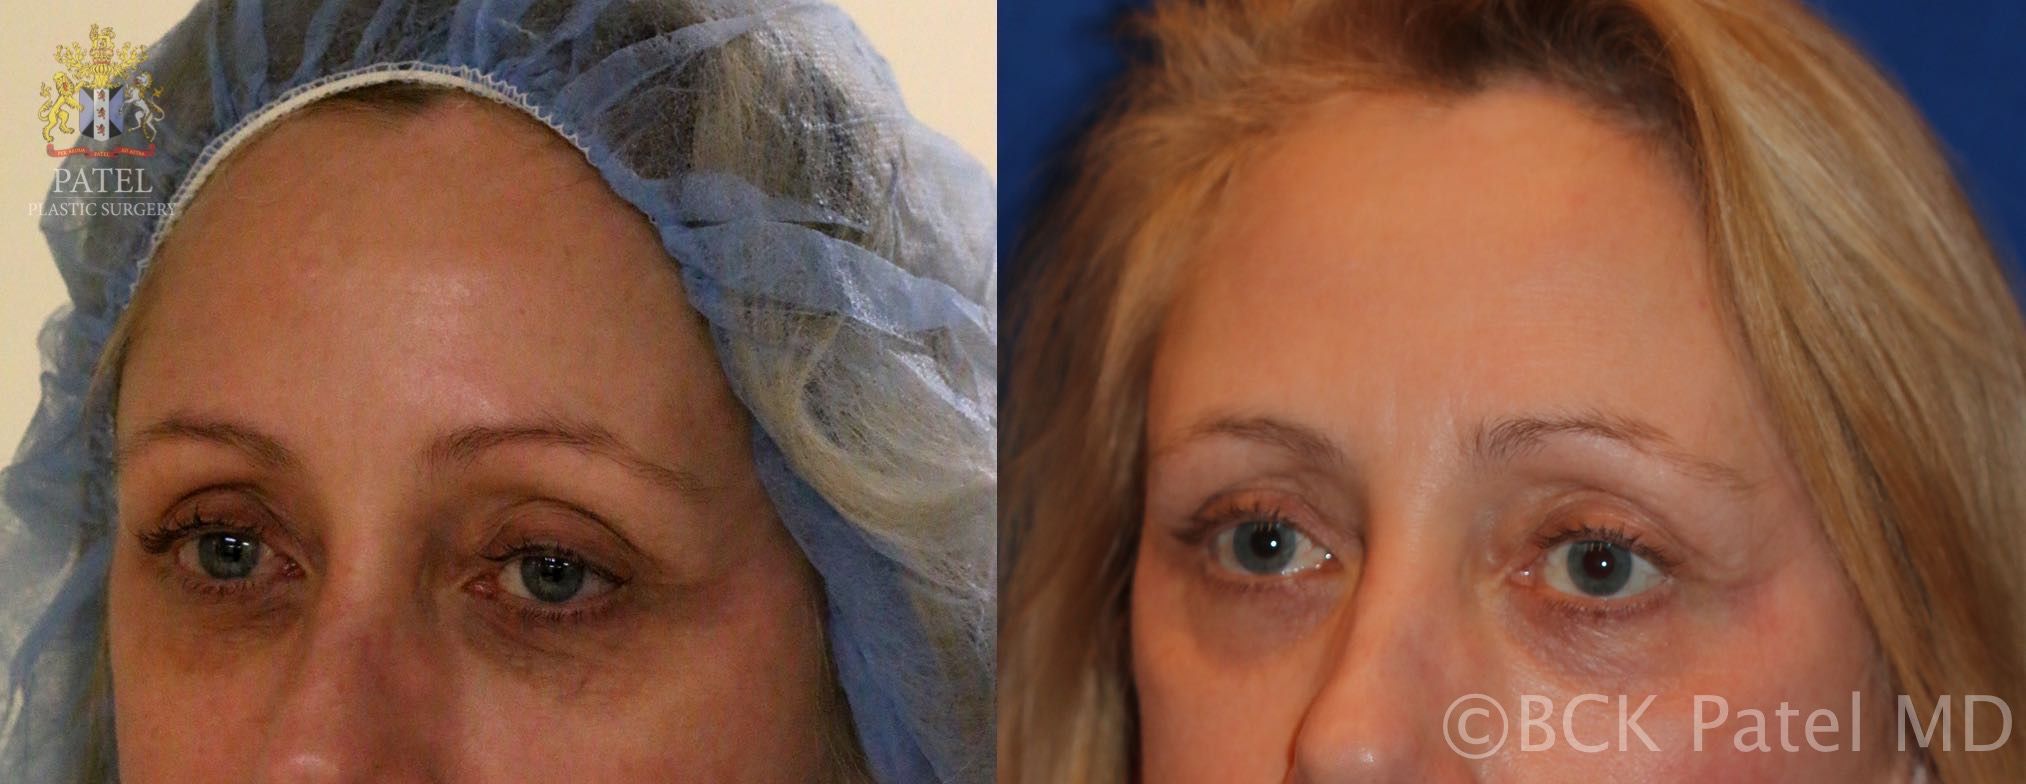 Before and after photos showing a nice improvement in the colour and texture of lower eyelid skin after fractionated CO2 laser. BCK Patel MD, FRCS, Salt Lake City